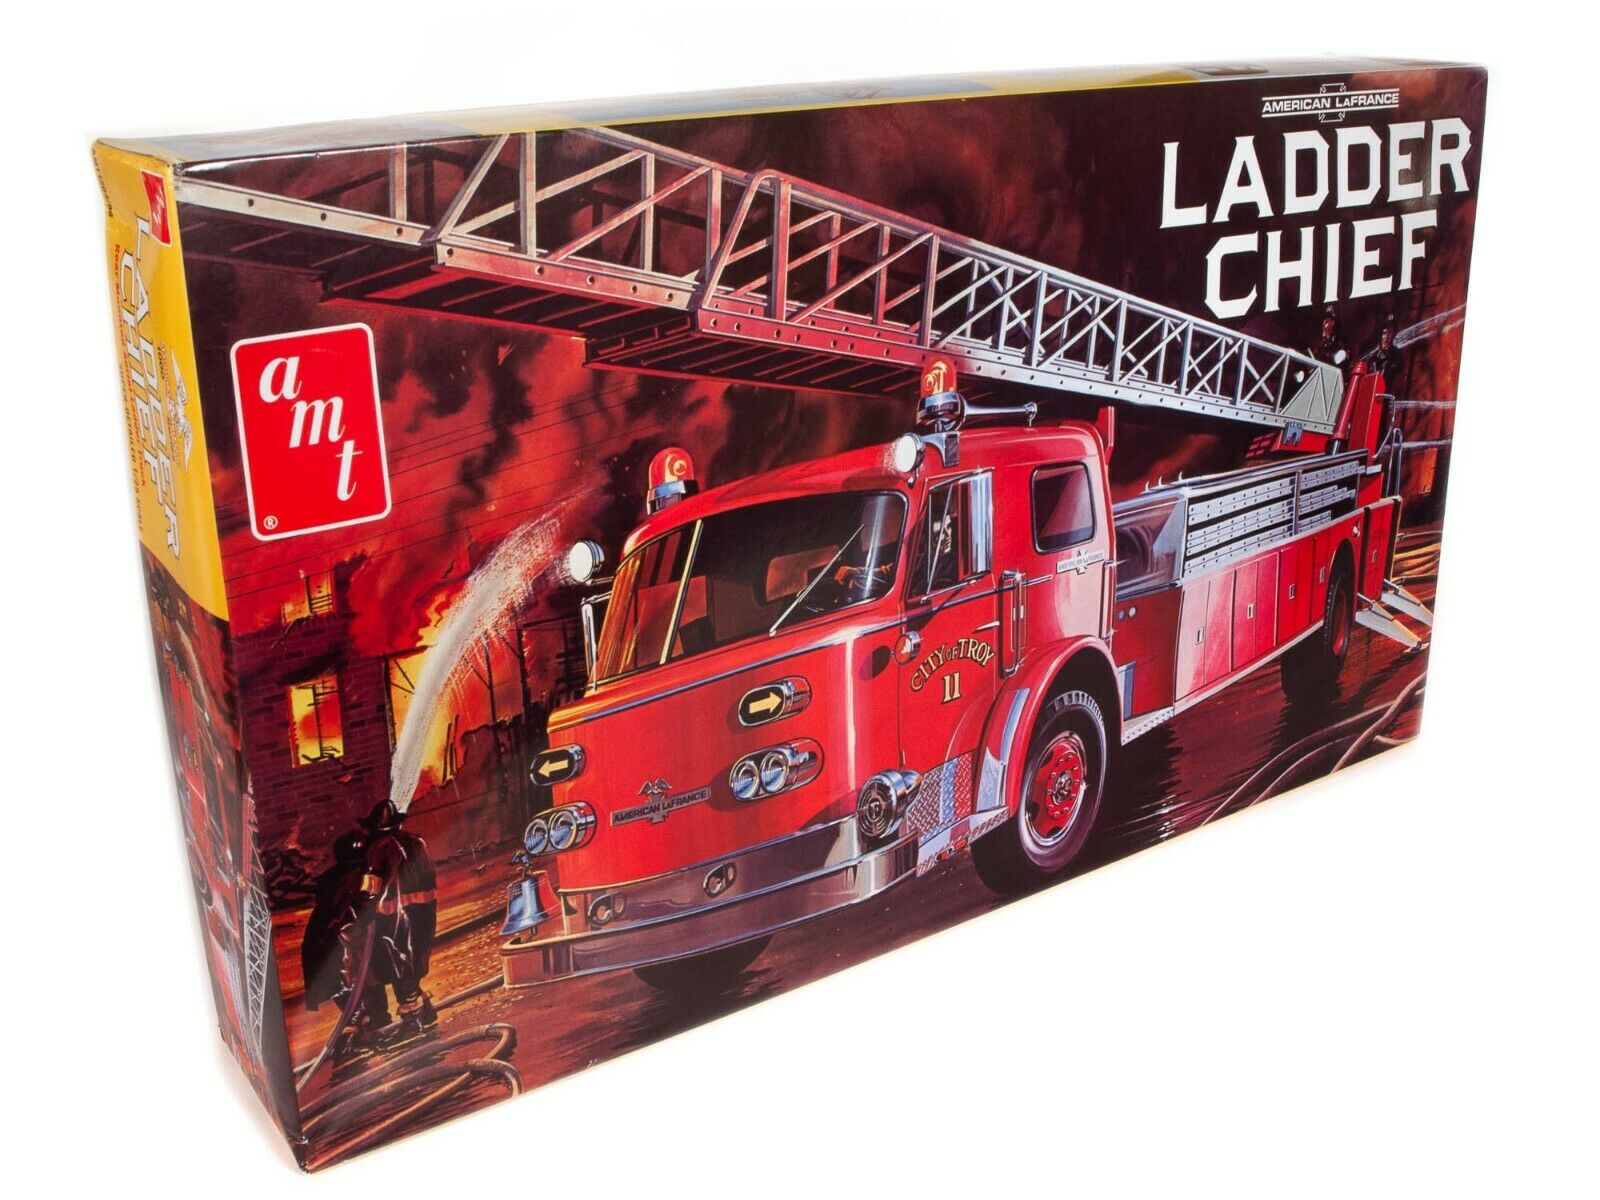 AMT 1204 1/25 American LaFrance Ladder Chief Fire Truck